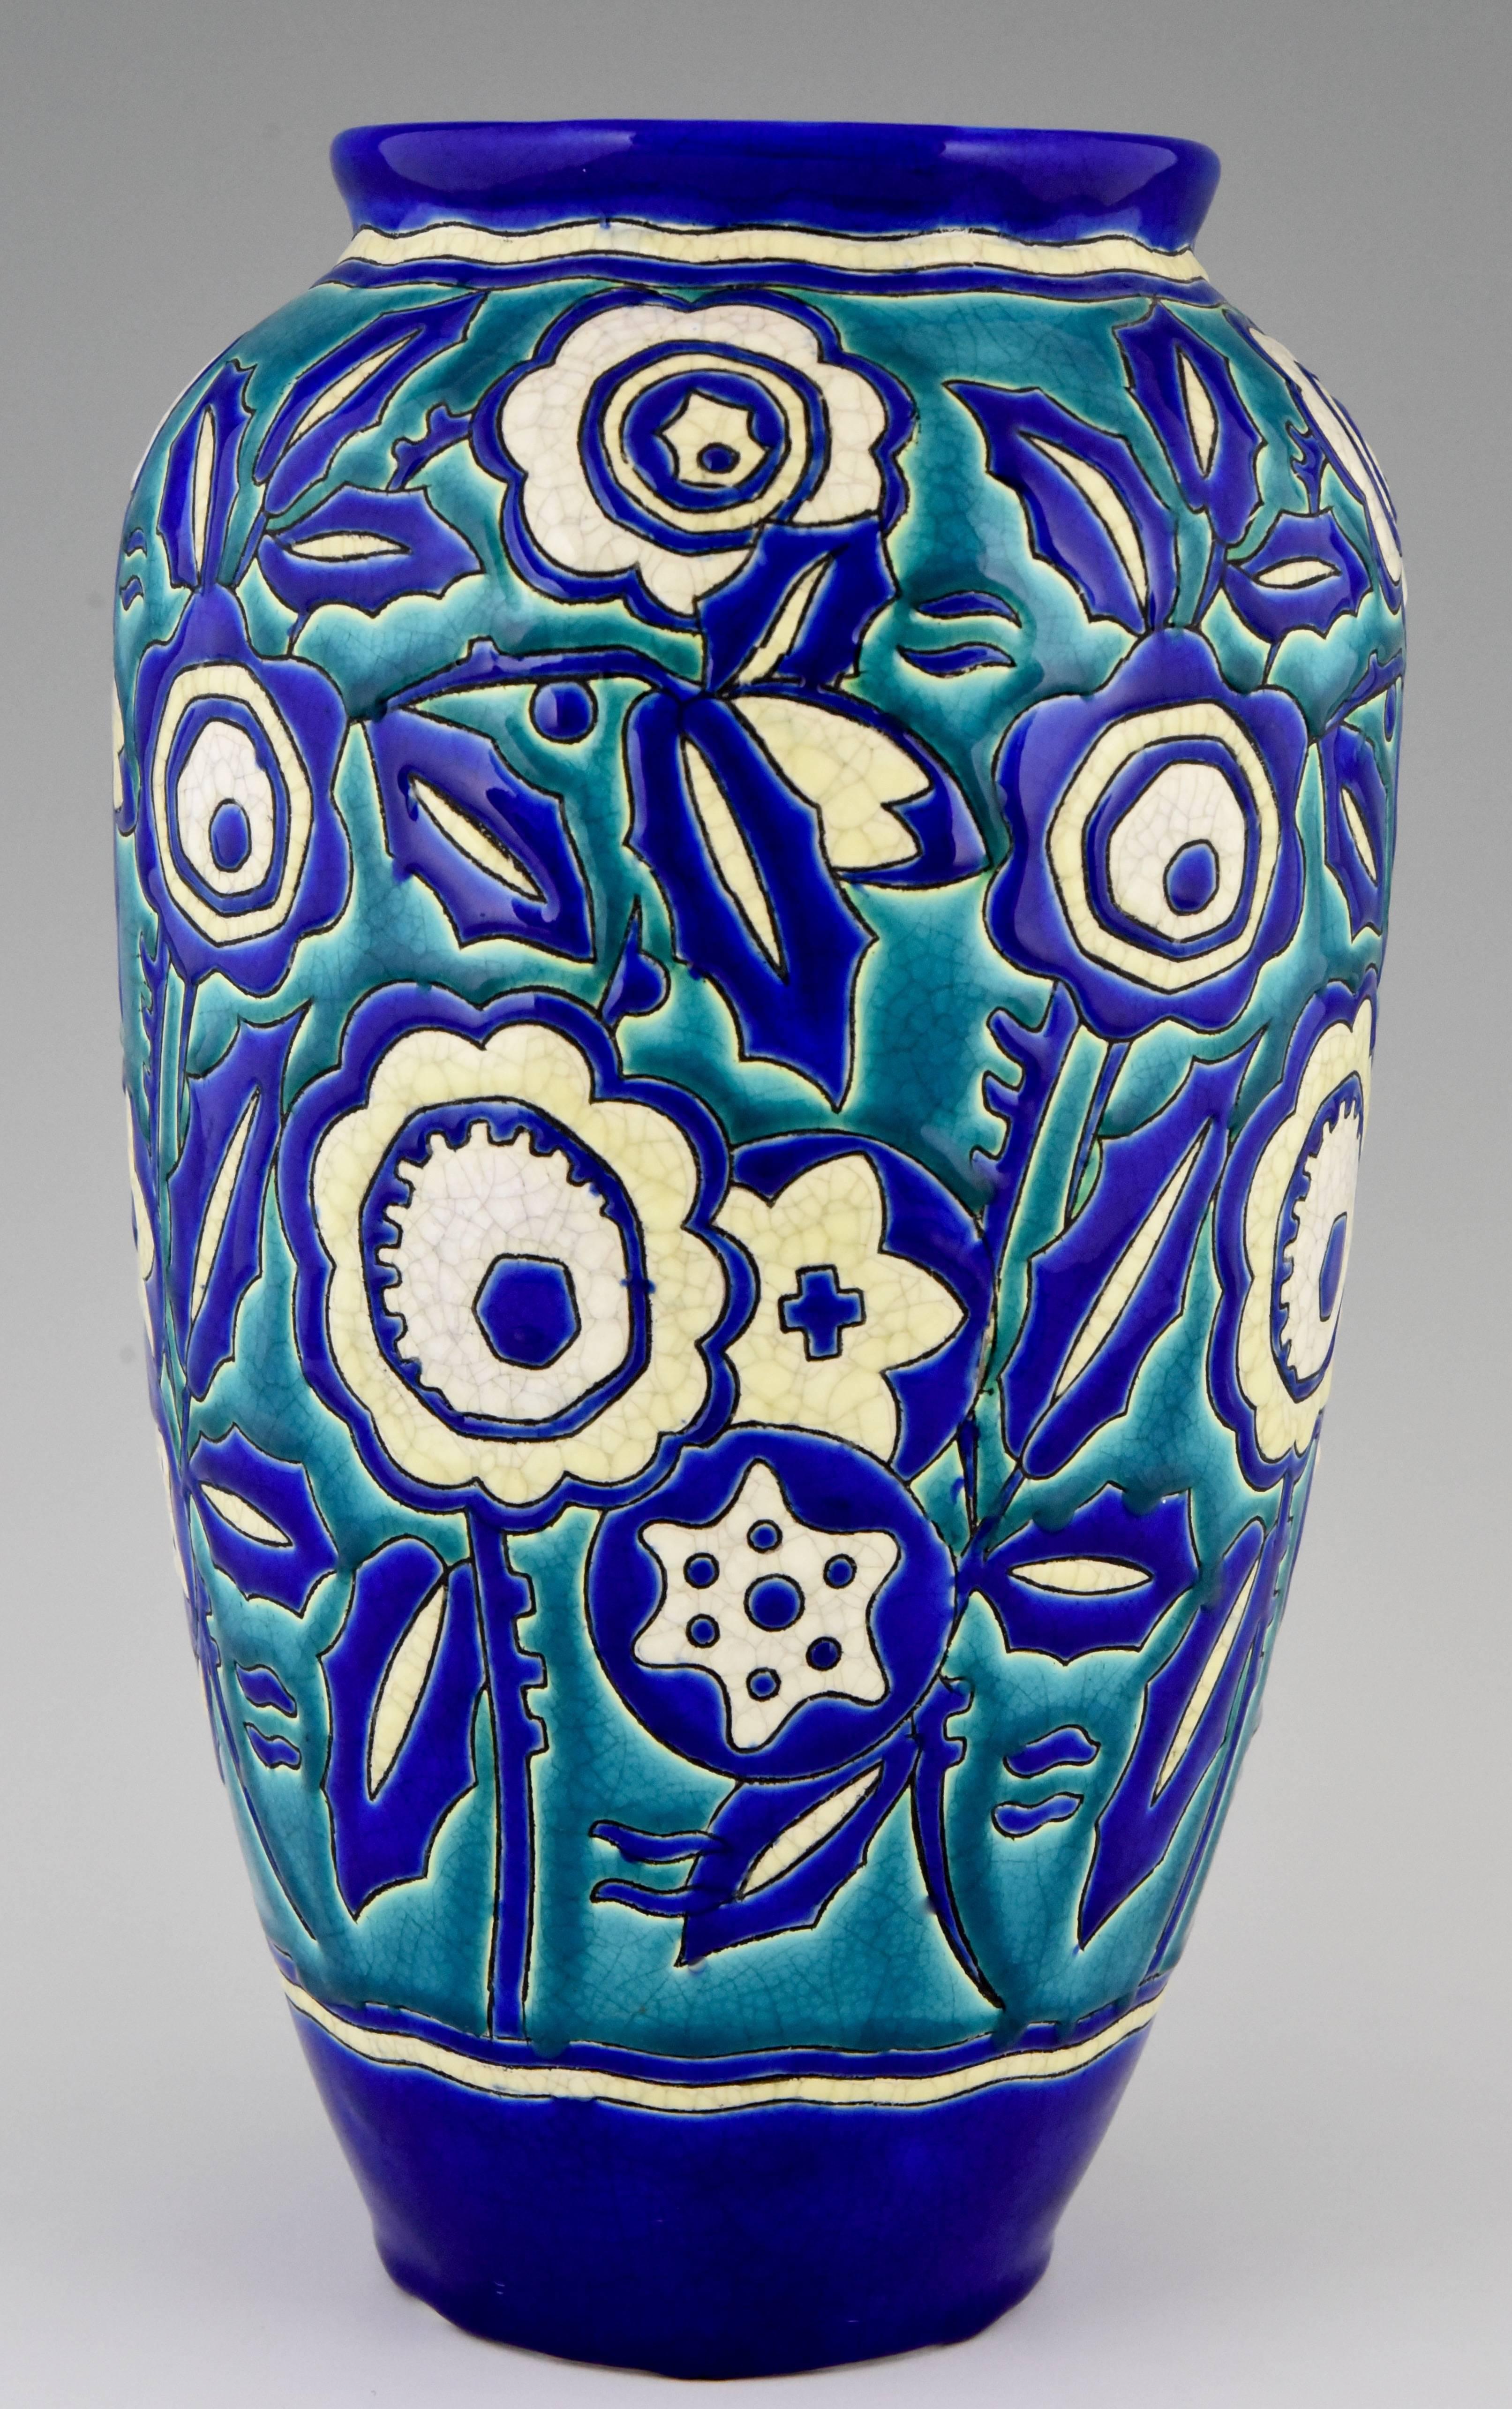 Colorful Art Deco craquelé vase by Keramis, Belgium.
With turquoise, blue and white craquelé flower pattern. 
 
Signature/ Marks: Keramis stamp. Numbered D1425 for the decor.
Style: Art Deco
Date: 1929
Material: Turquoise, blue and white